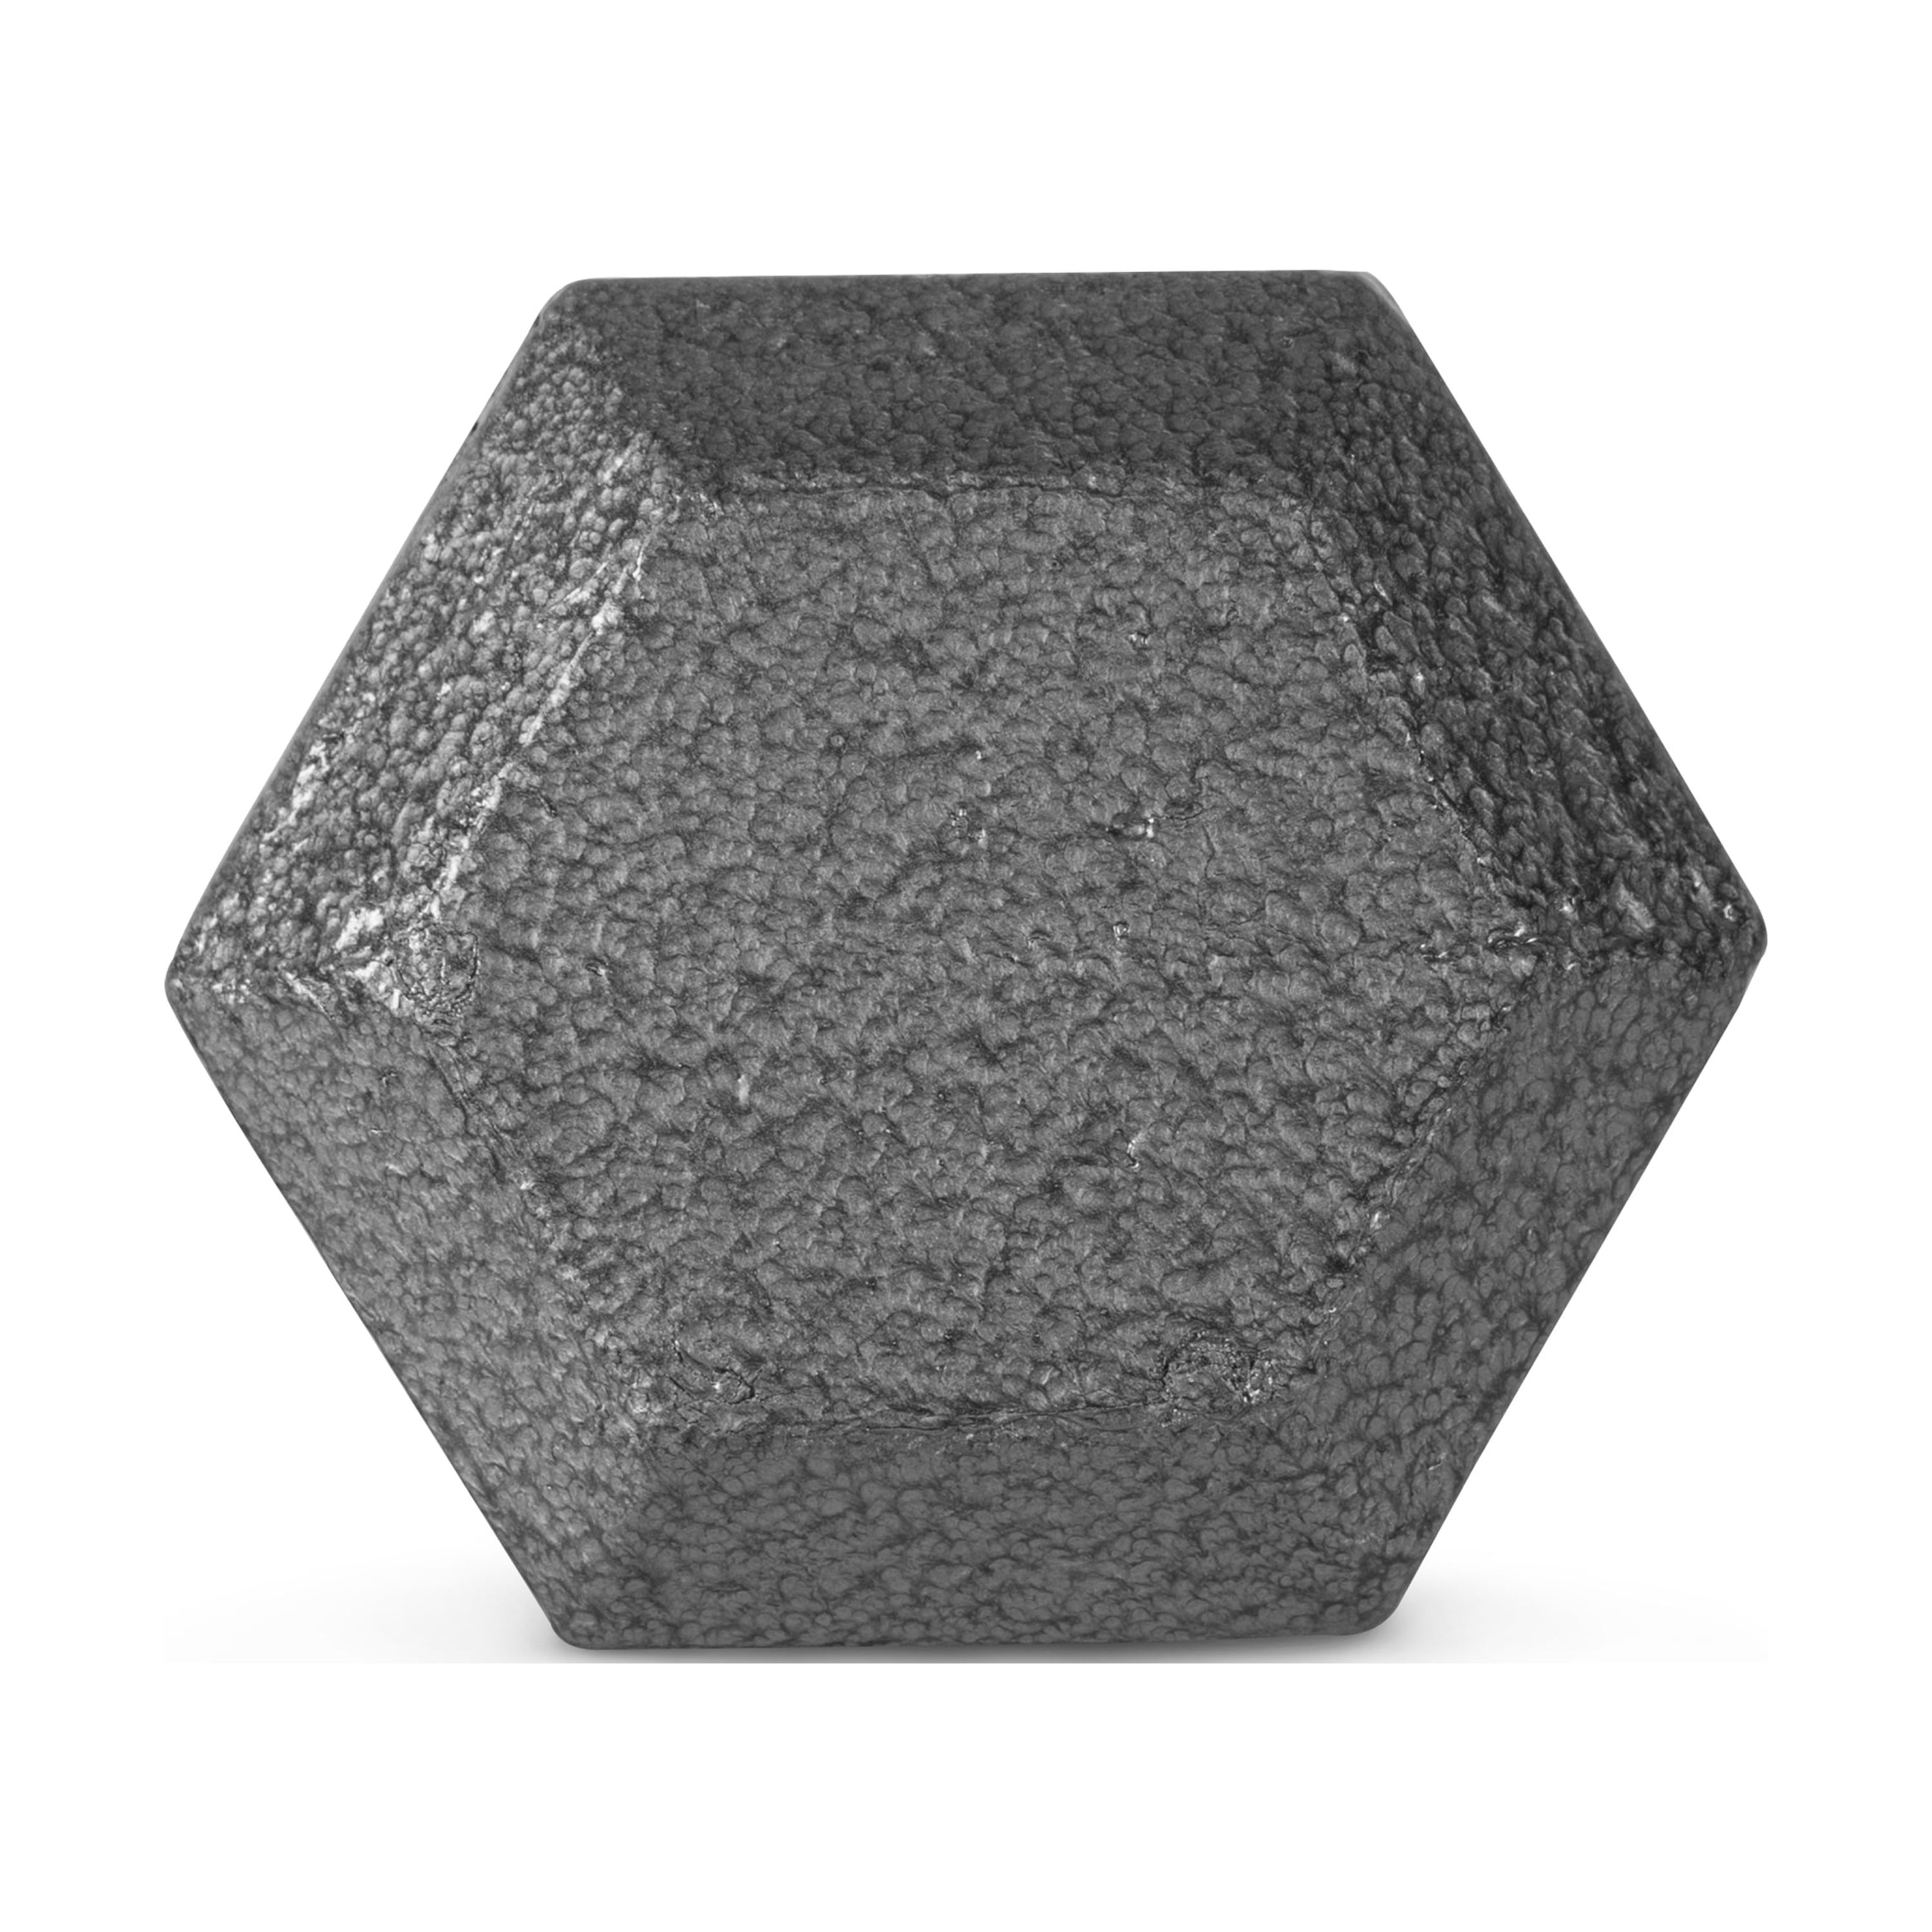 CAP Barbell 75lb Cast Iron Hex Dumbbell, Single - image 5 of 6